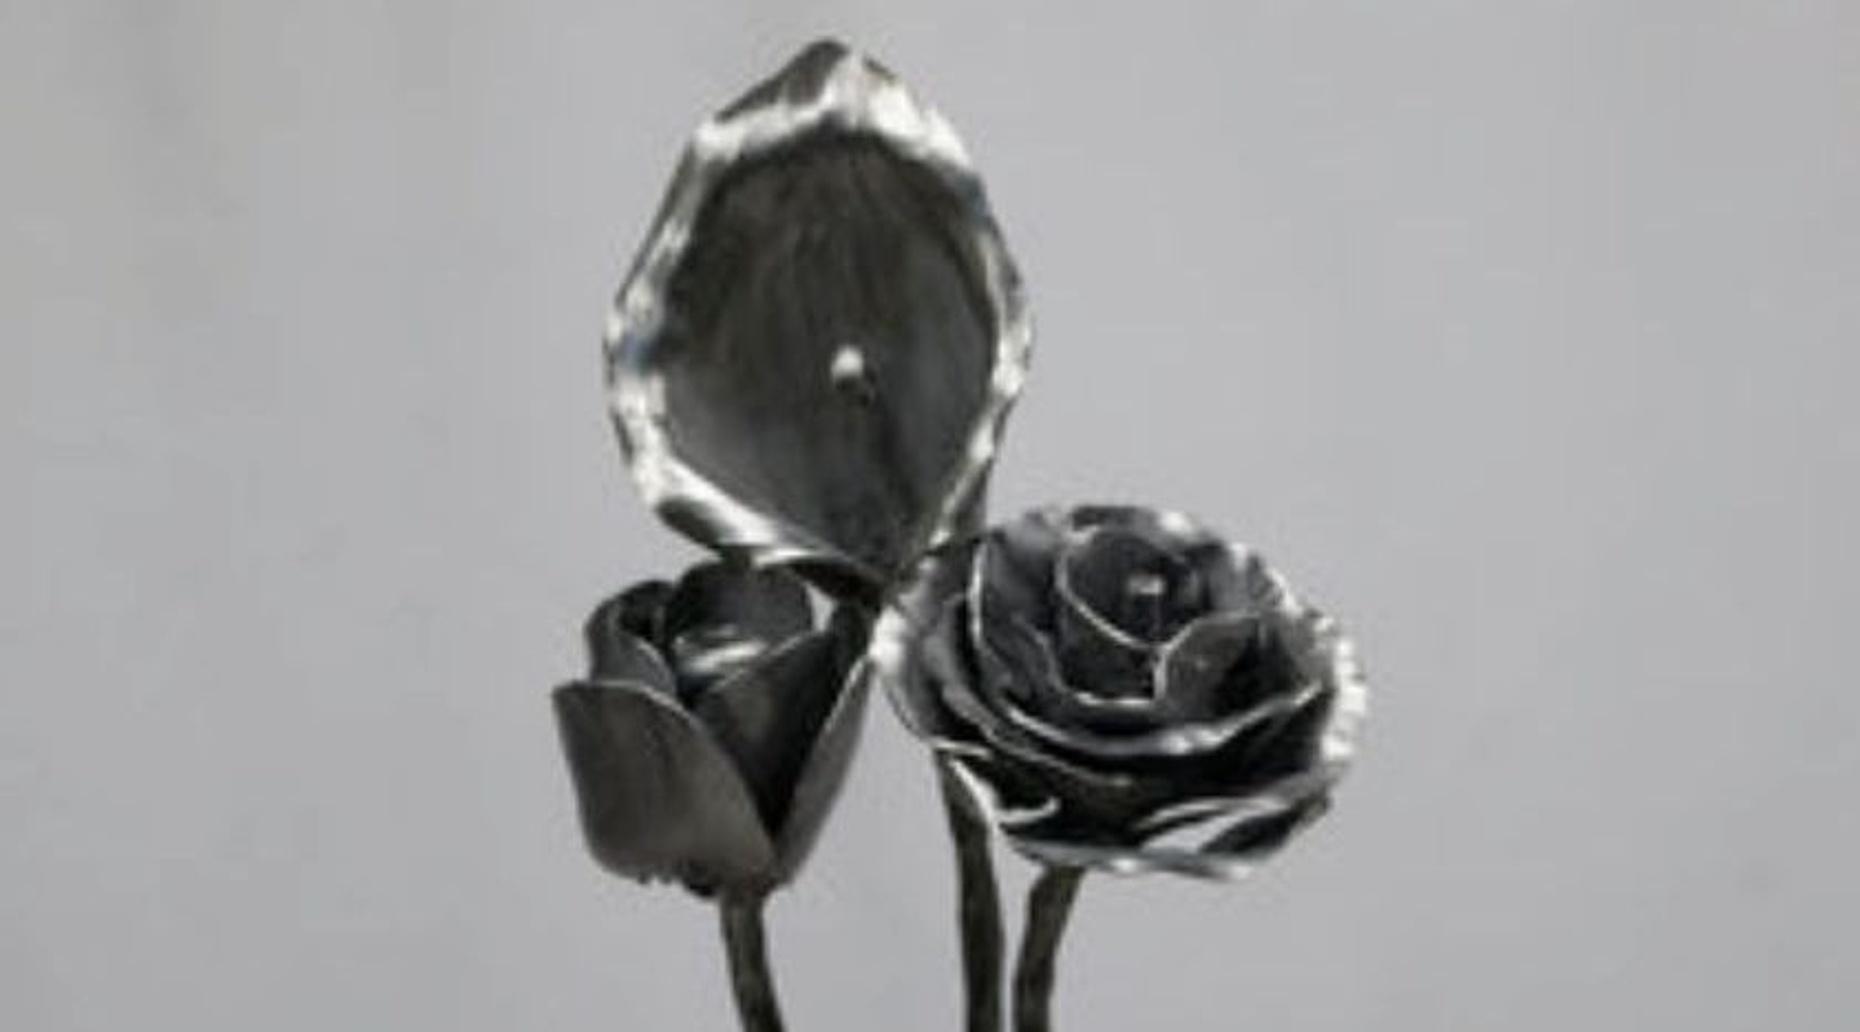 Timeless Flowers Blacksmith Class in Provo